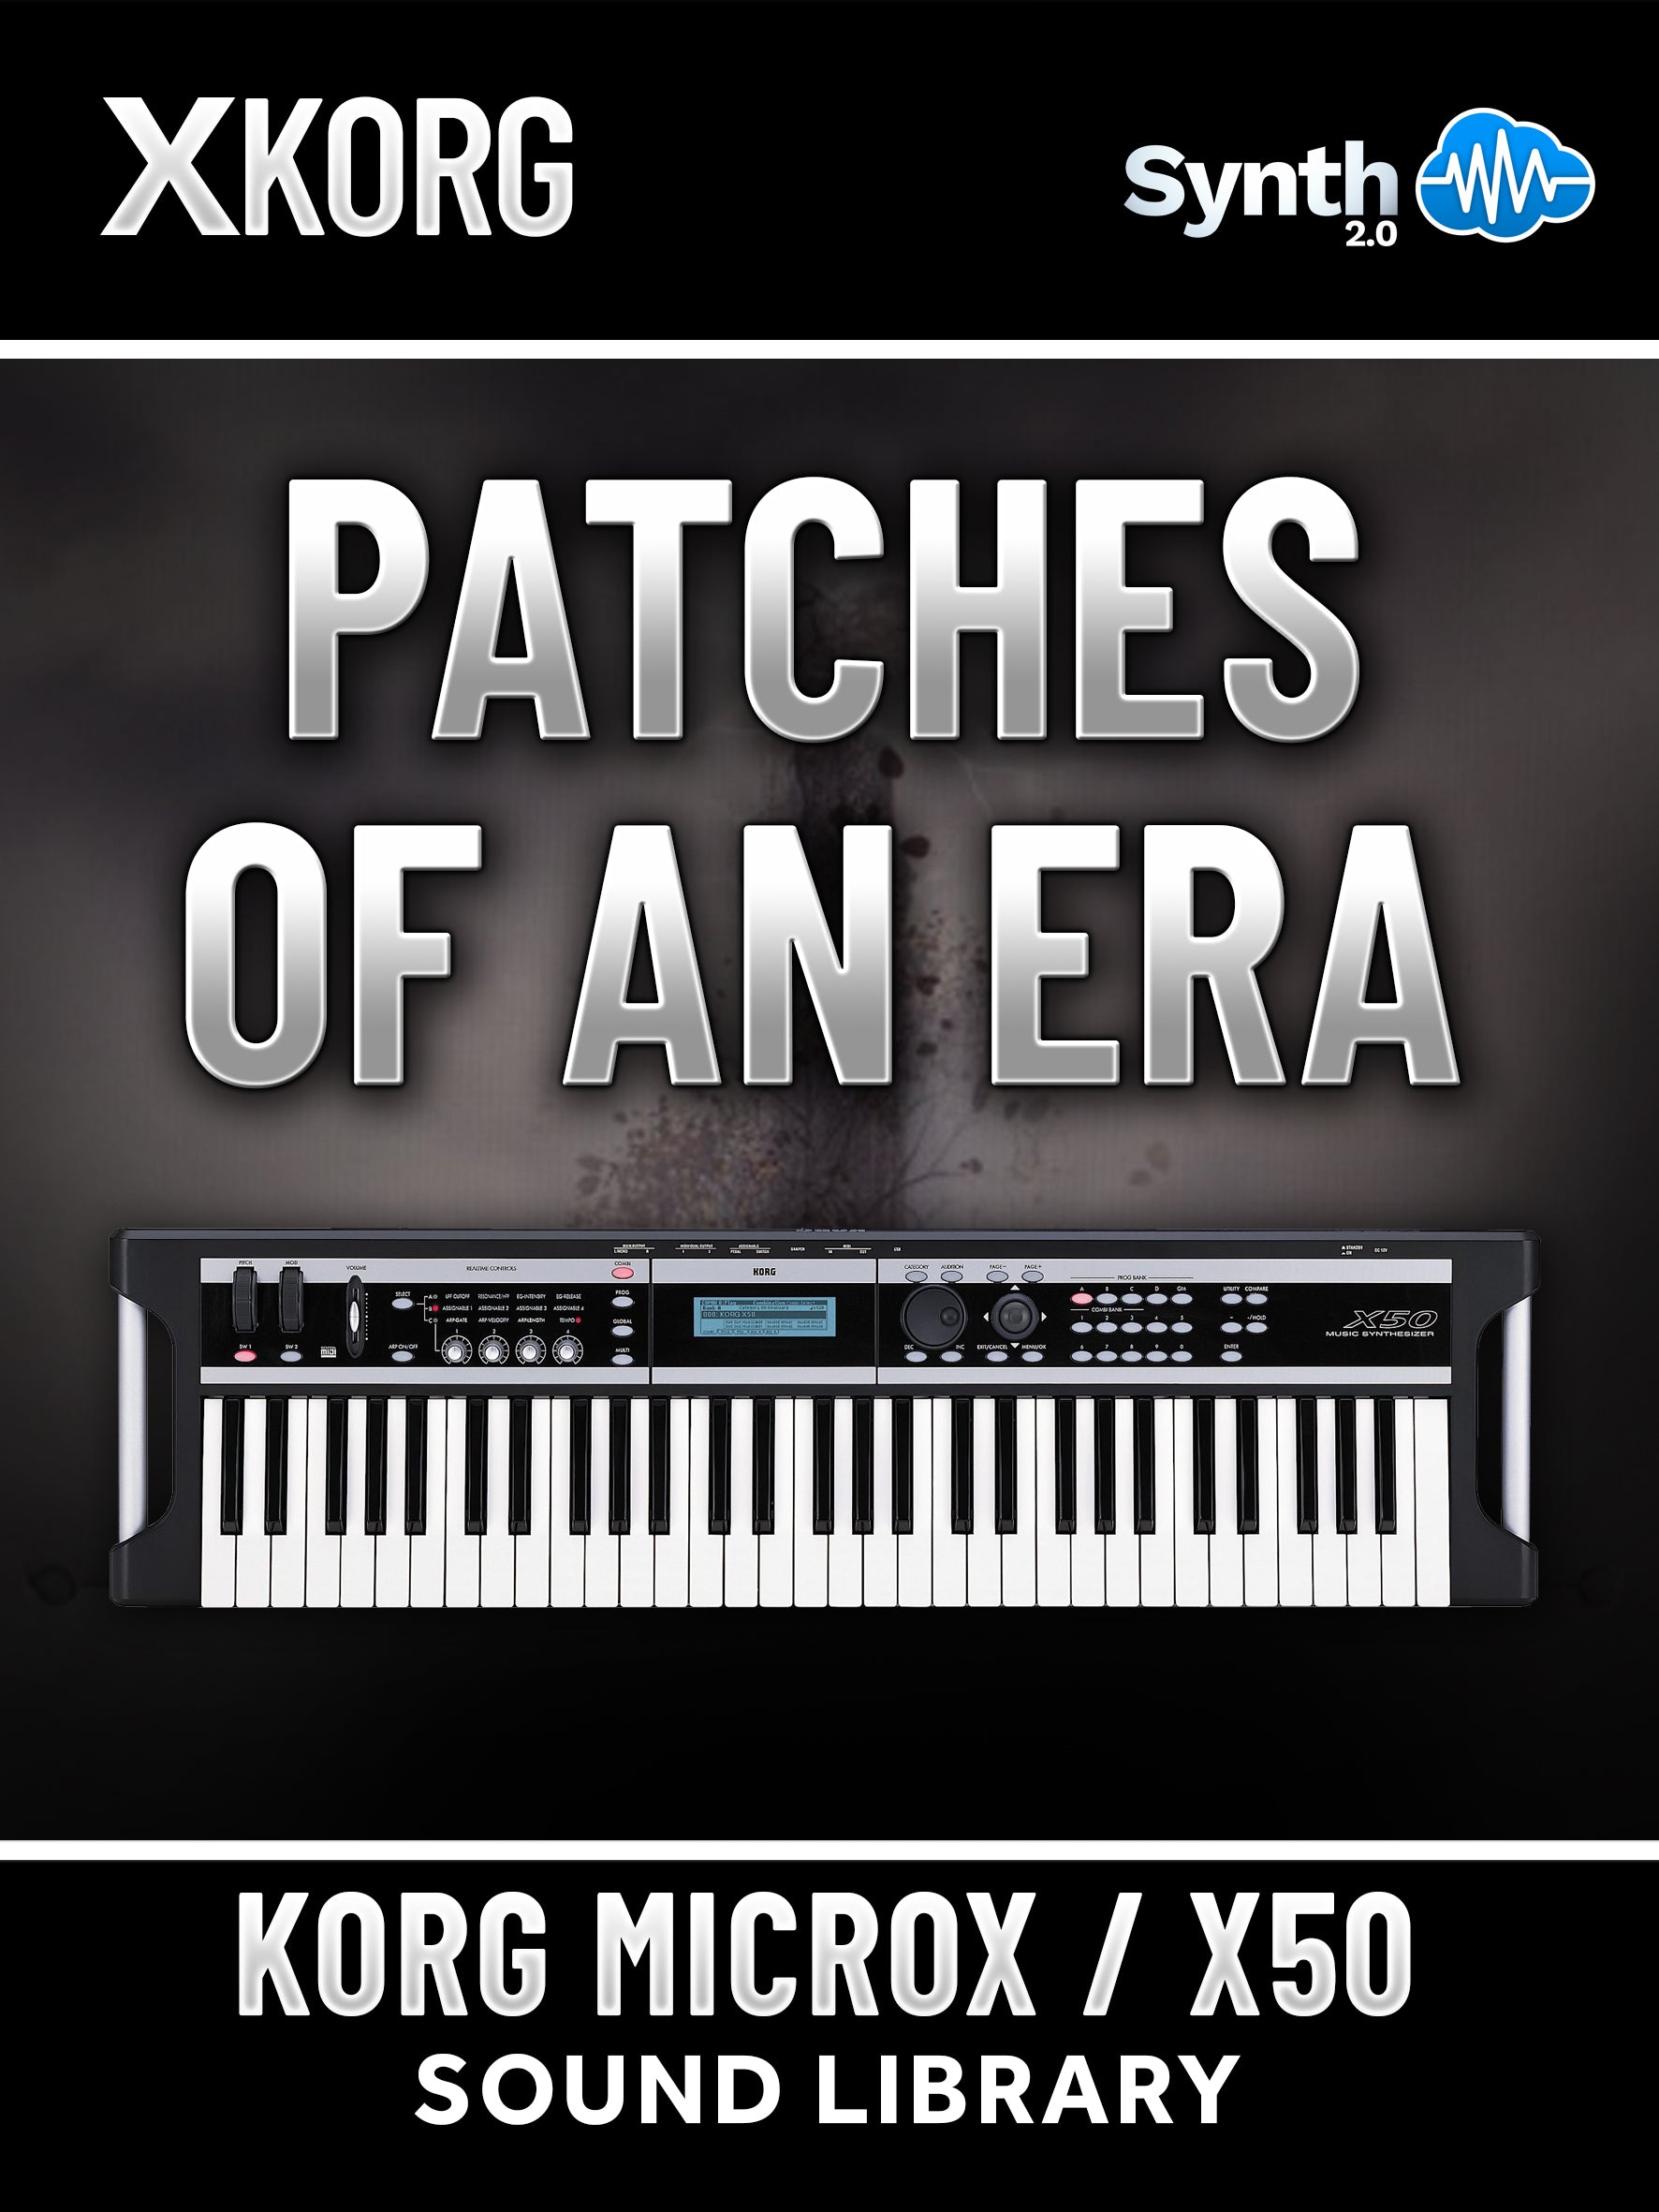 SKL003 - Patches Of An Era - Nightwish Cover Pack - Korg MicroX / X50 ( 34 presets )